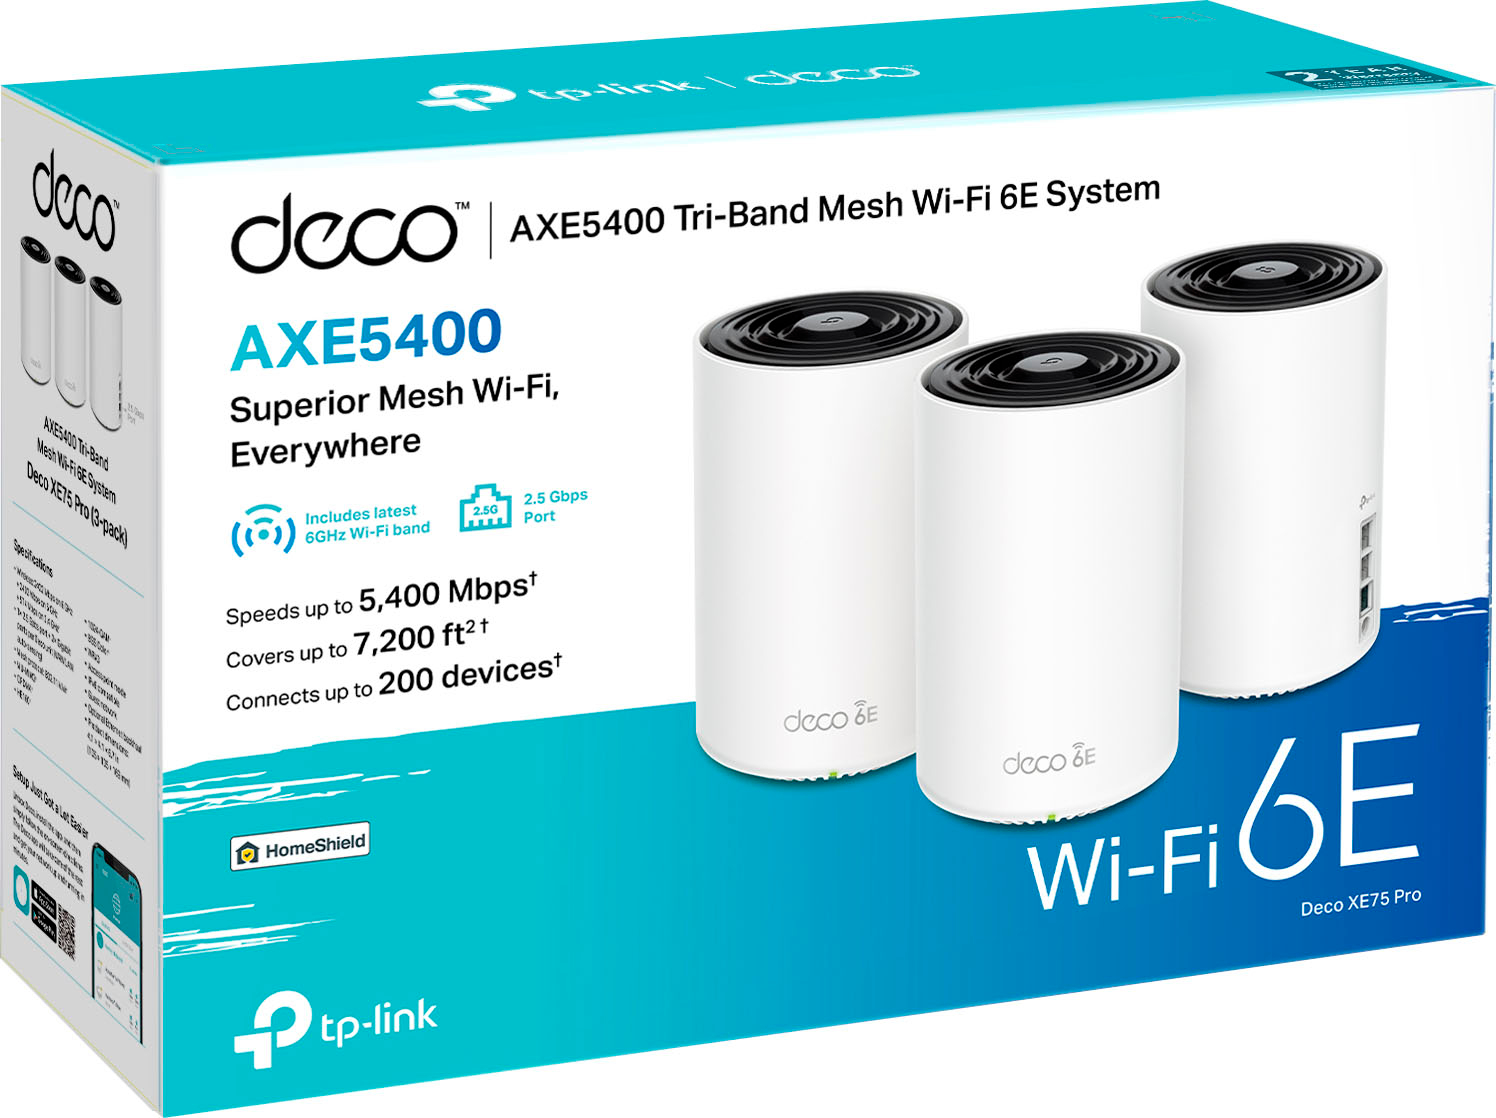 TP-Link - Deco XE75 Pro AXE5400 Tri-Band Mesh Wi-Fi 6E System (1-Pack) -  White